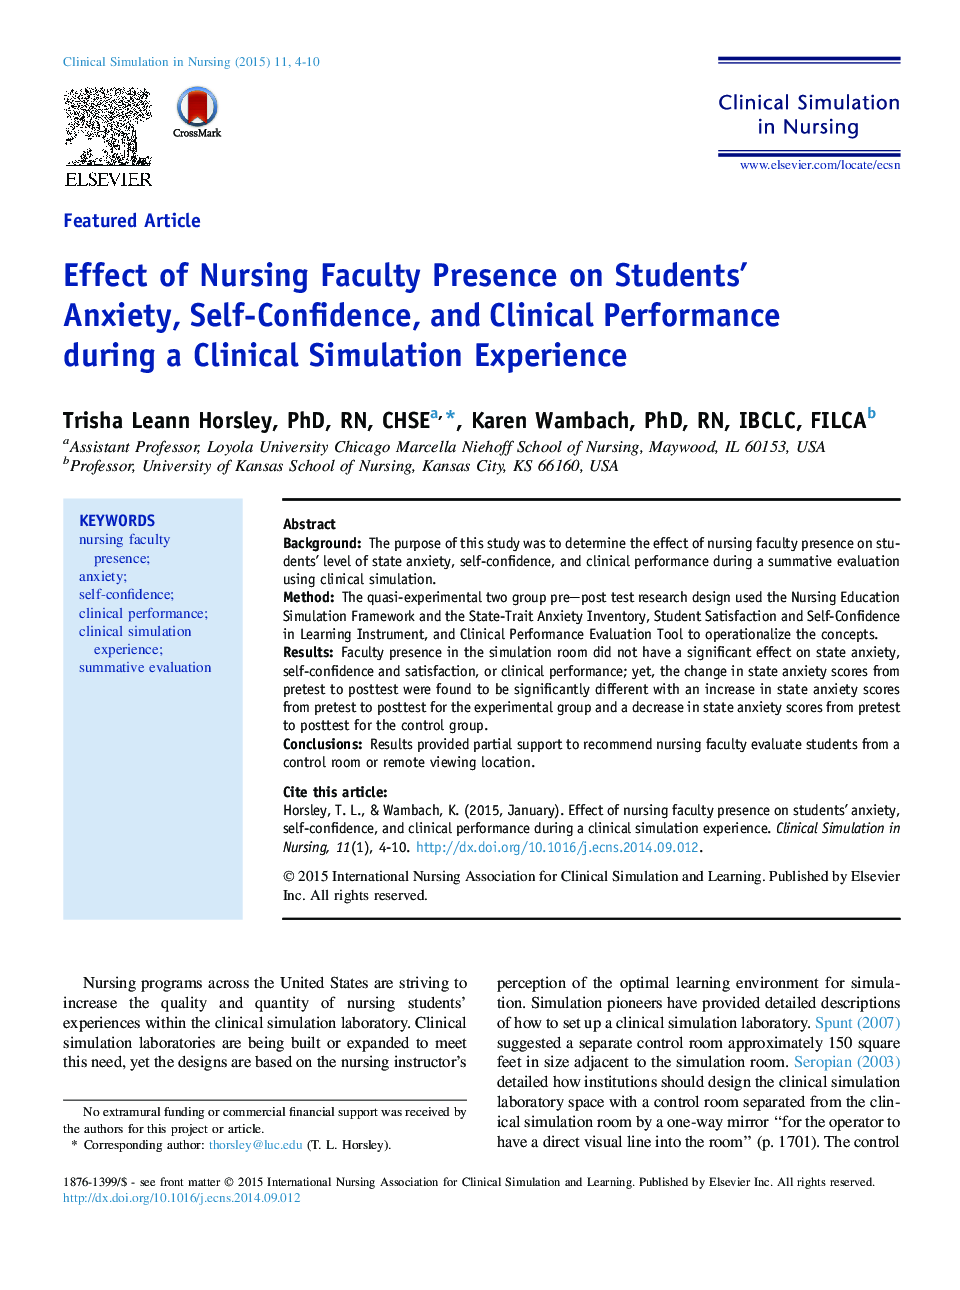 Effect of Nursing Faculty Presence on Students' Anxiety, Self-Confidence, and Clinical Performance during a Clinical Simulation Experience 